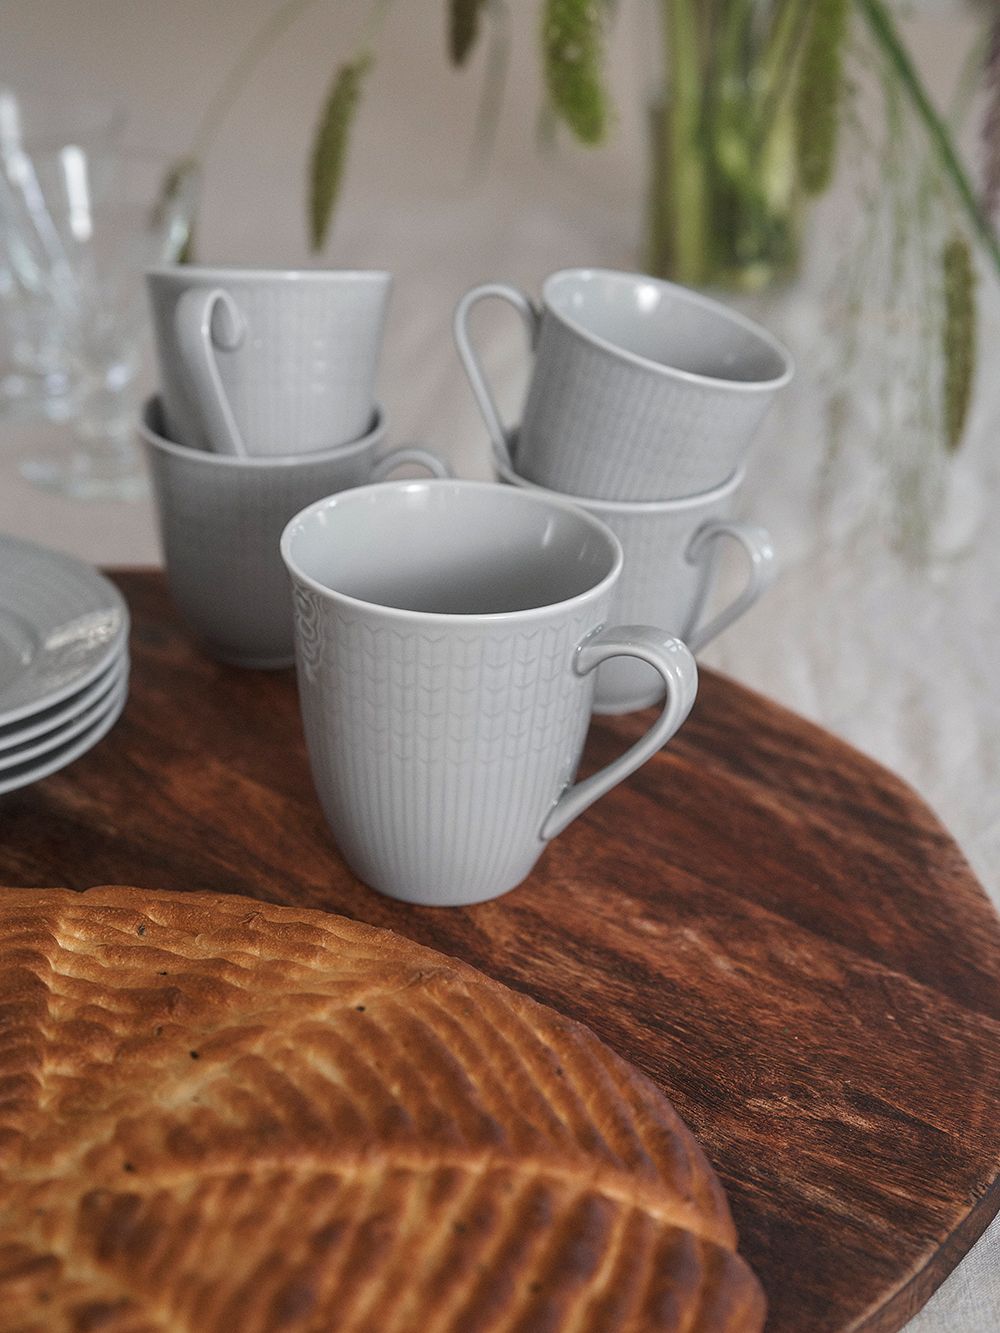 An image of Rörstrand's Swedish Grace plates and mugs in a table setting, as part of the dining room decor.